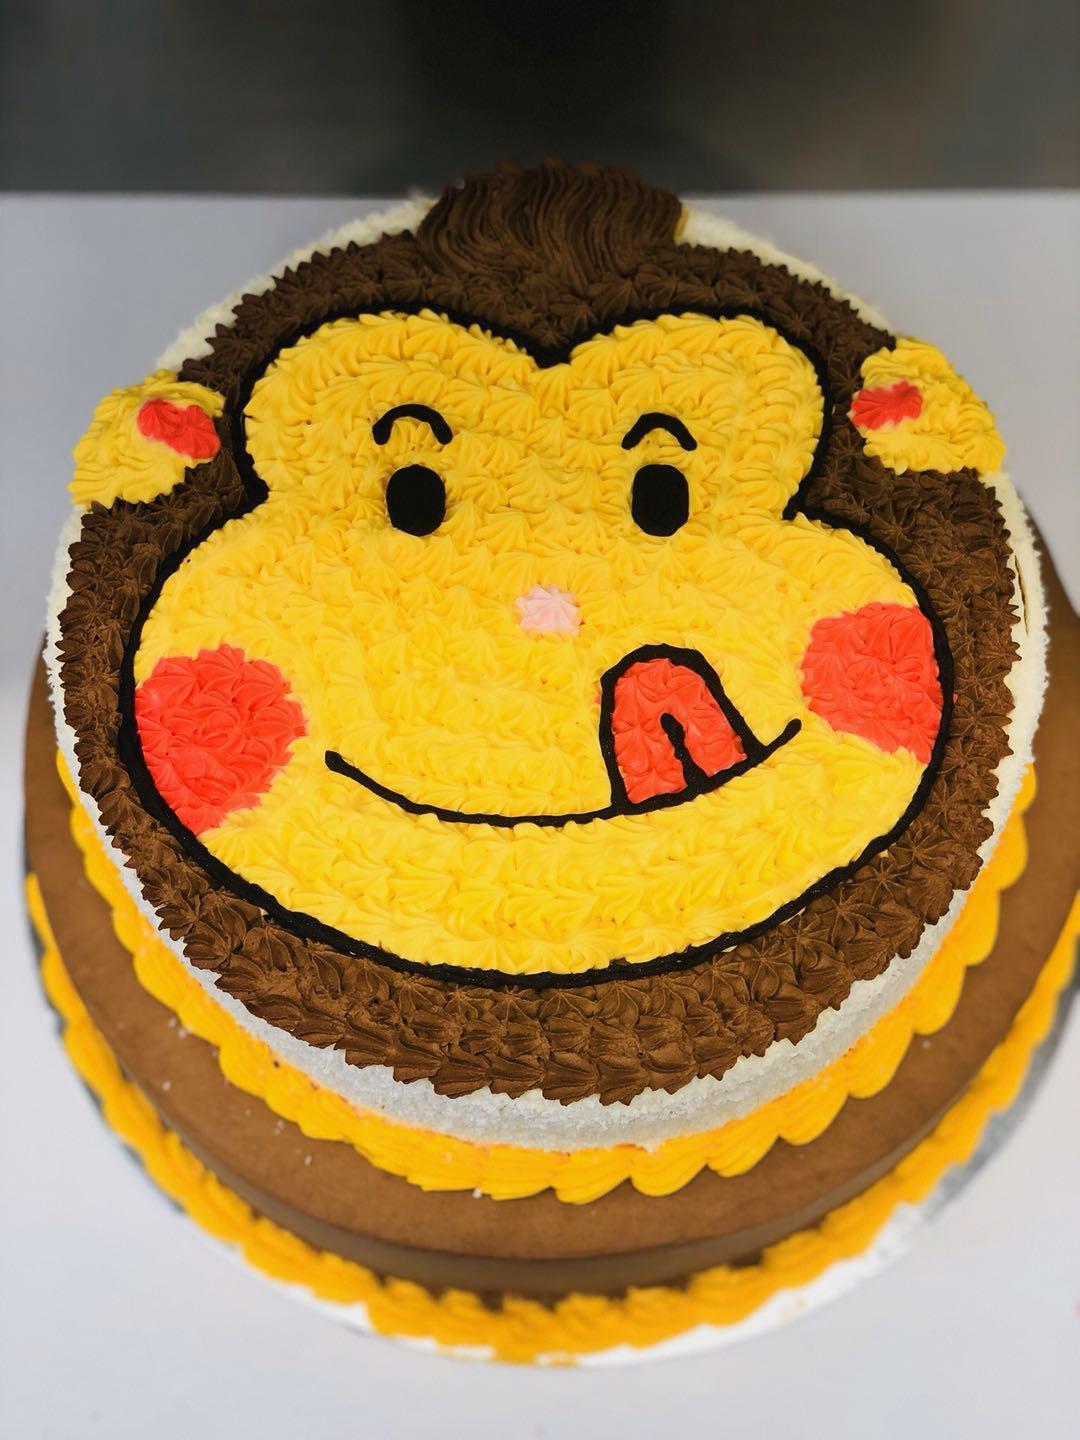 Top more than 72 monkey face cake best - awesomeenglish.edu.vn